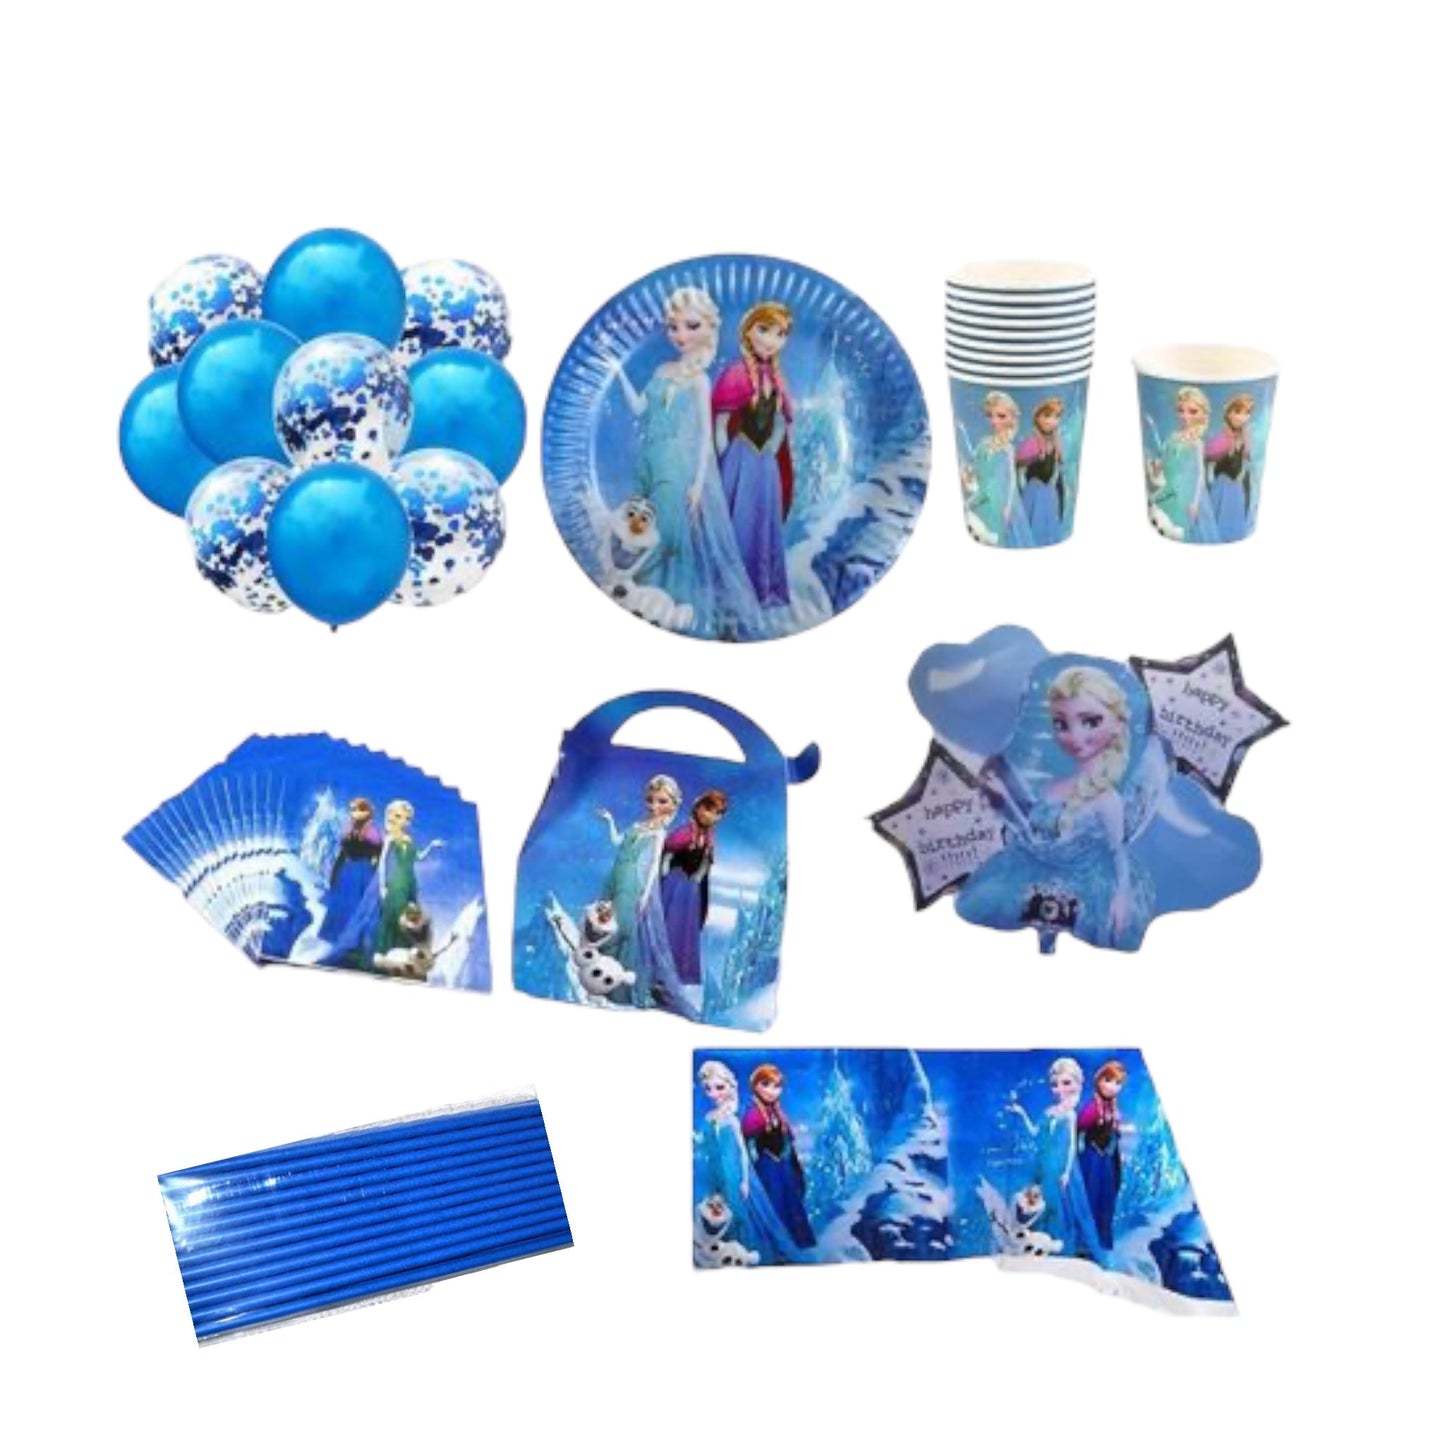 Party with Frozen-inspired V&N Goodies Galore Party Pack V&N Goodies Galore